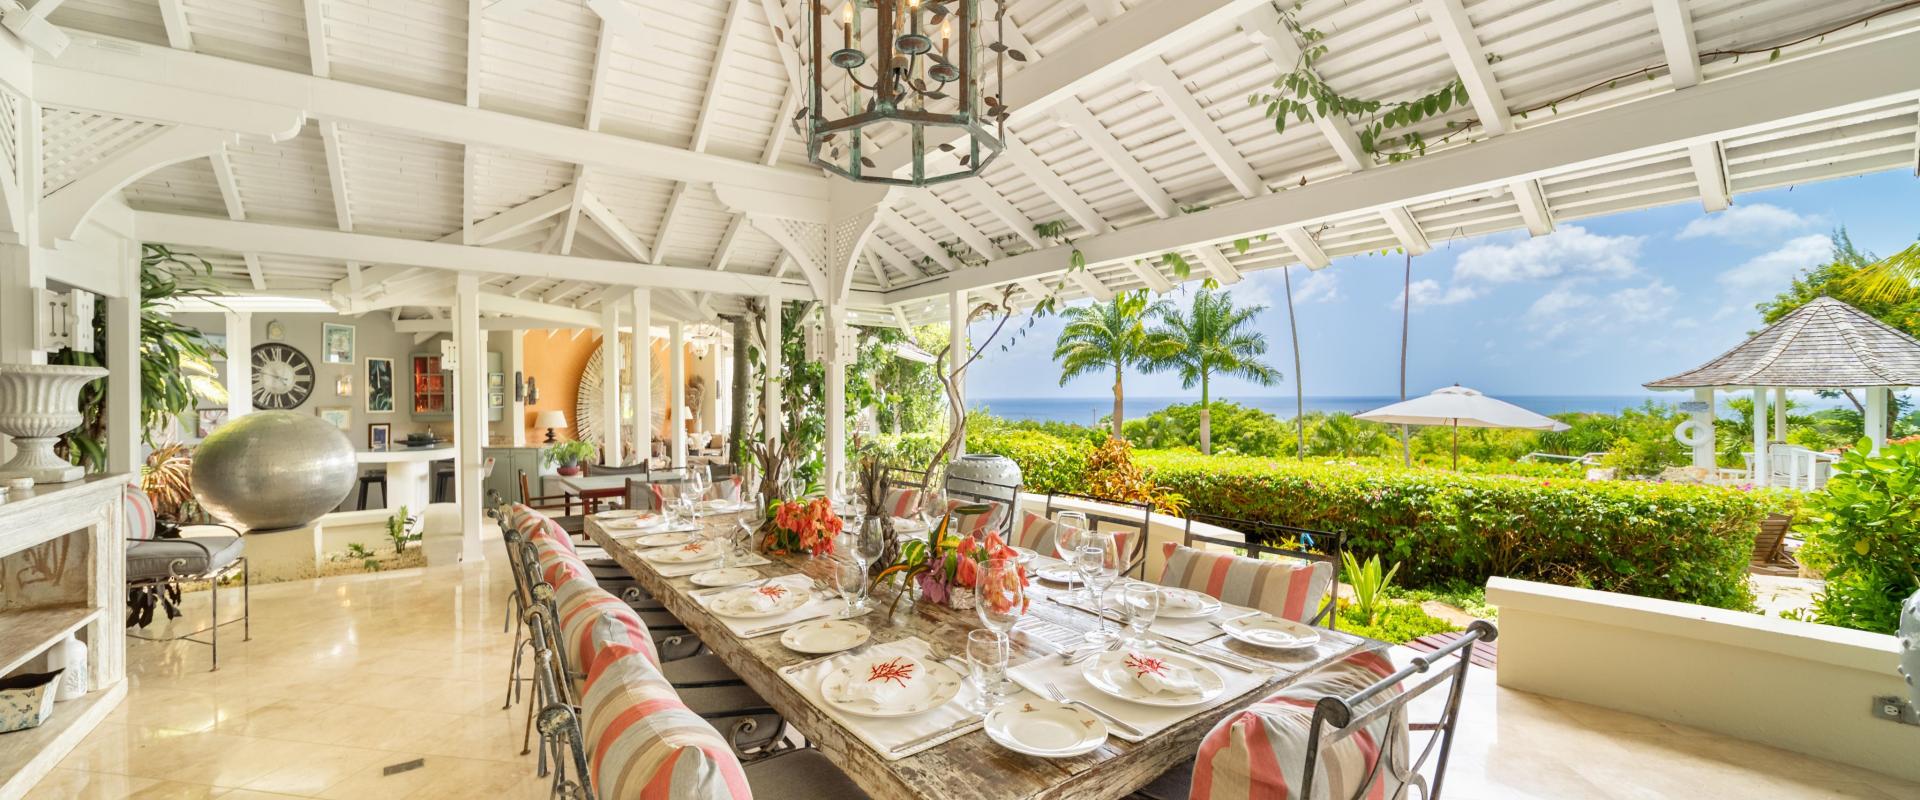 Point of View Holiday Rental In Sandy Lane Barbados Informal Dining With Garden and Ocean Views